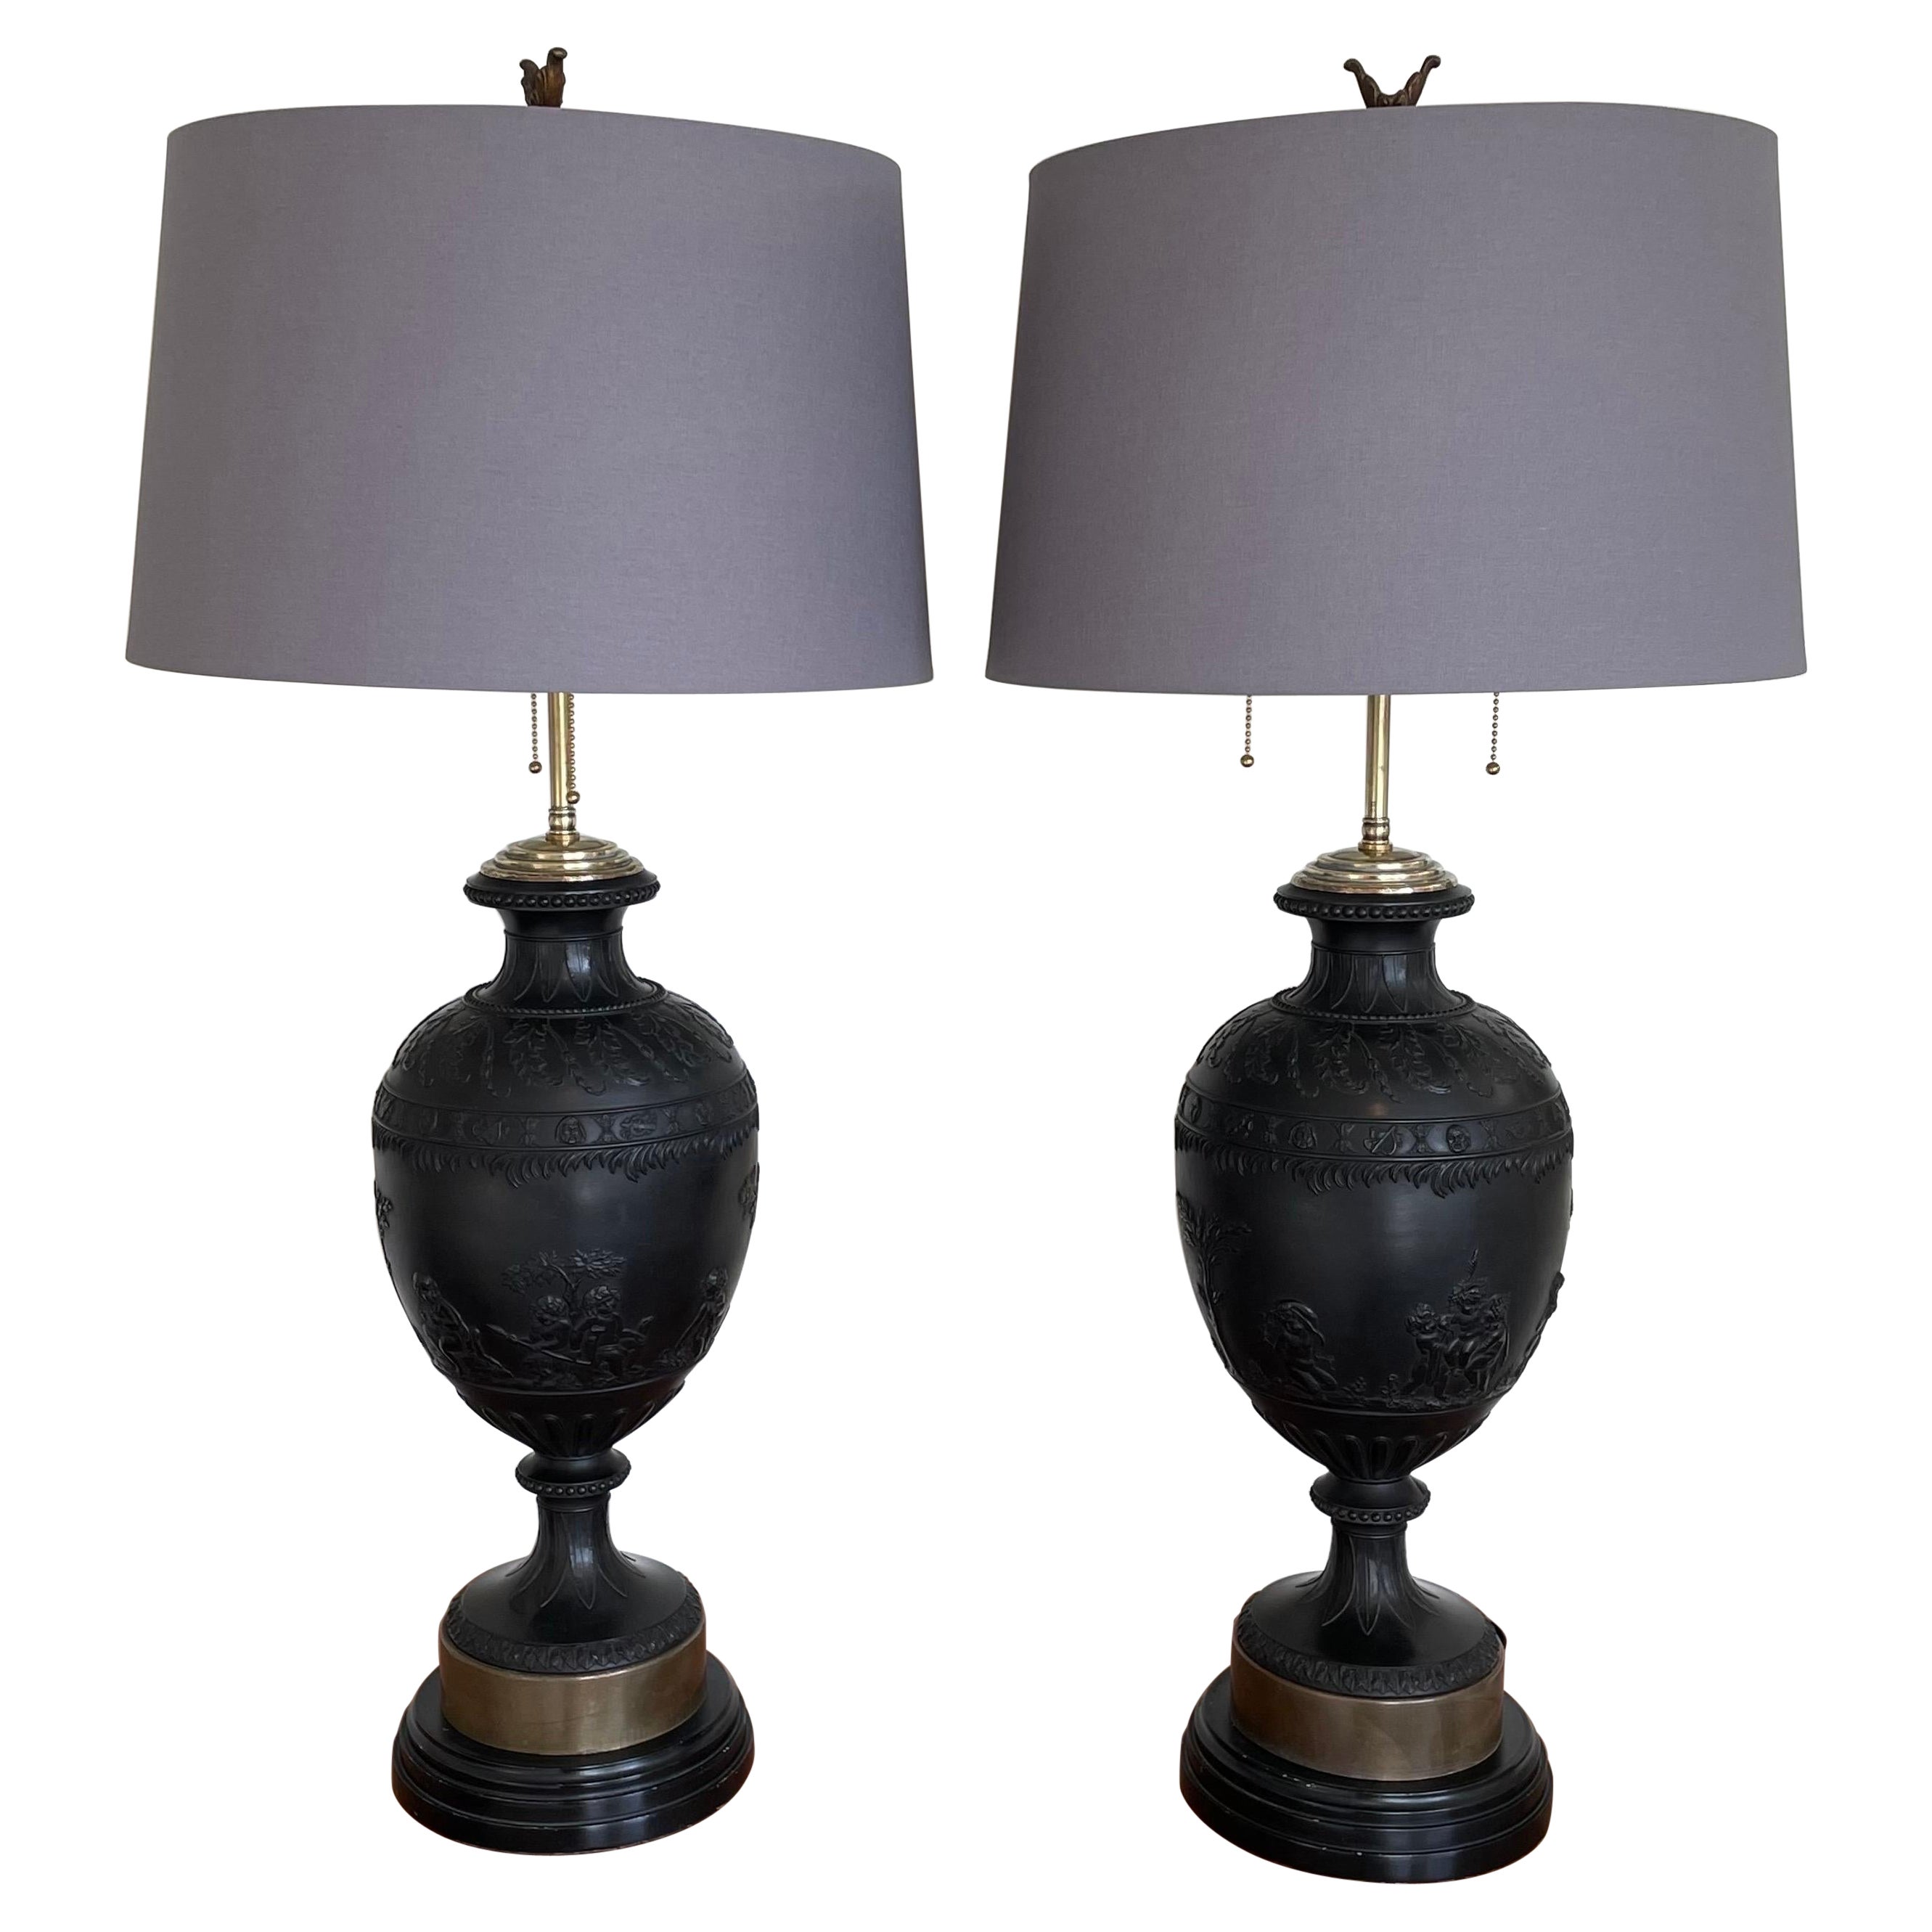 Monumental Pair of Black Basalt Table Lamps by Wedgwood, Late 19th Century For Sale